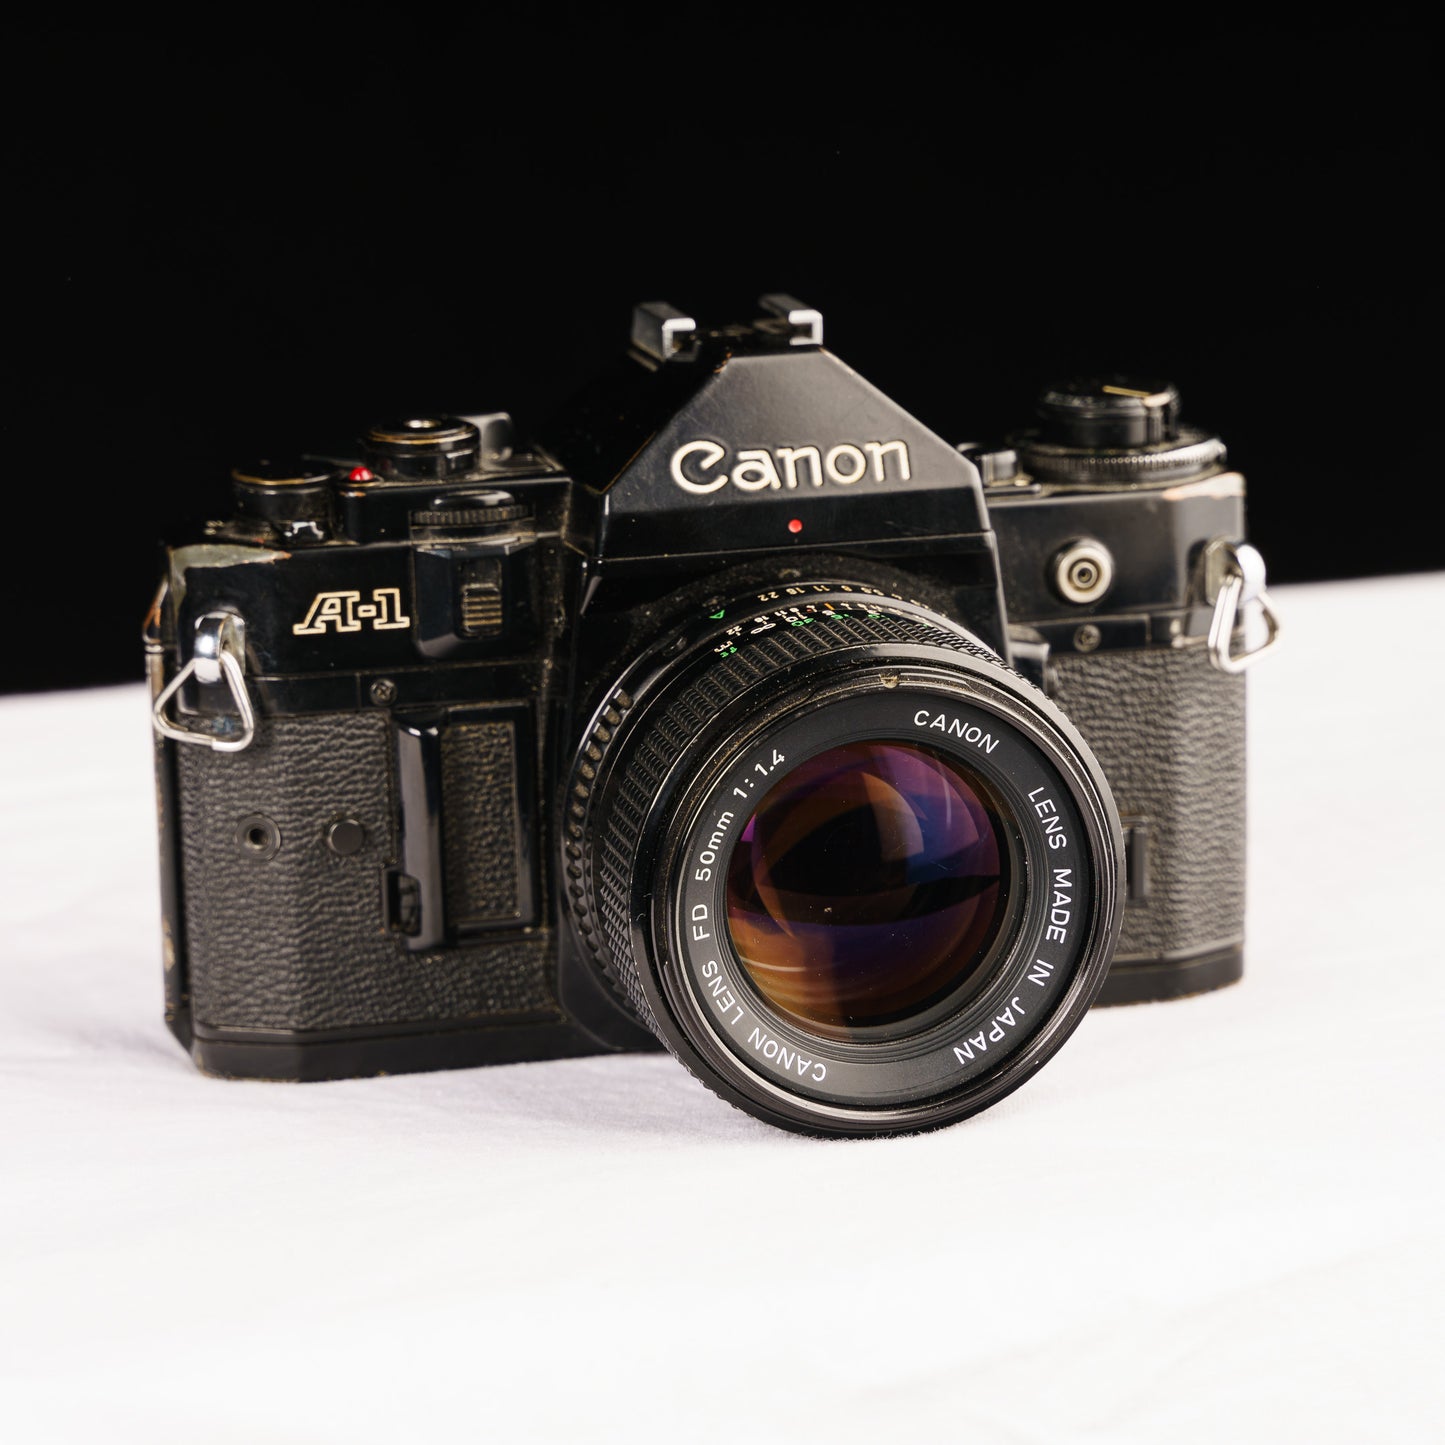 Canon A-1 35mm Film SLR with Canon FD 50mm f/1.4 Lens